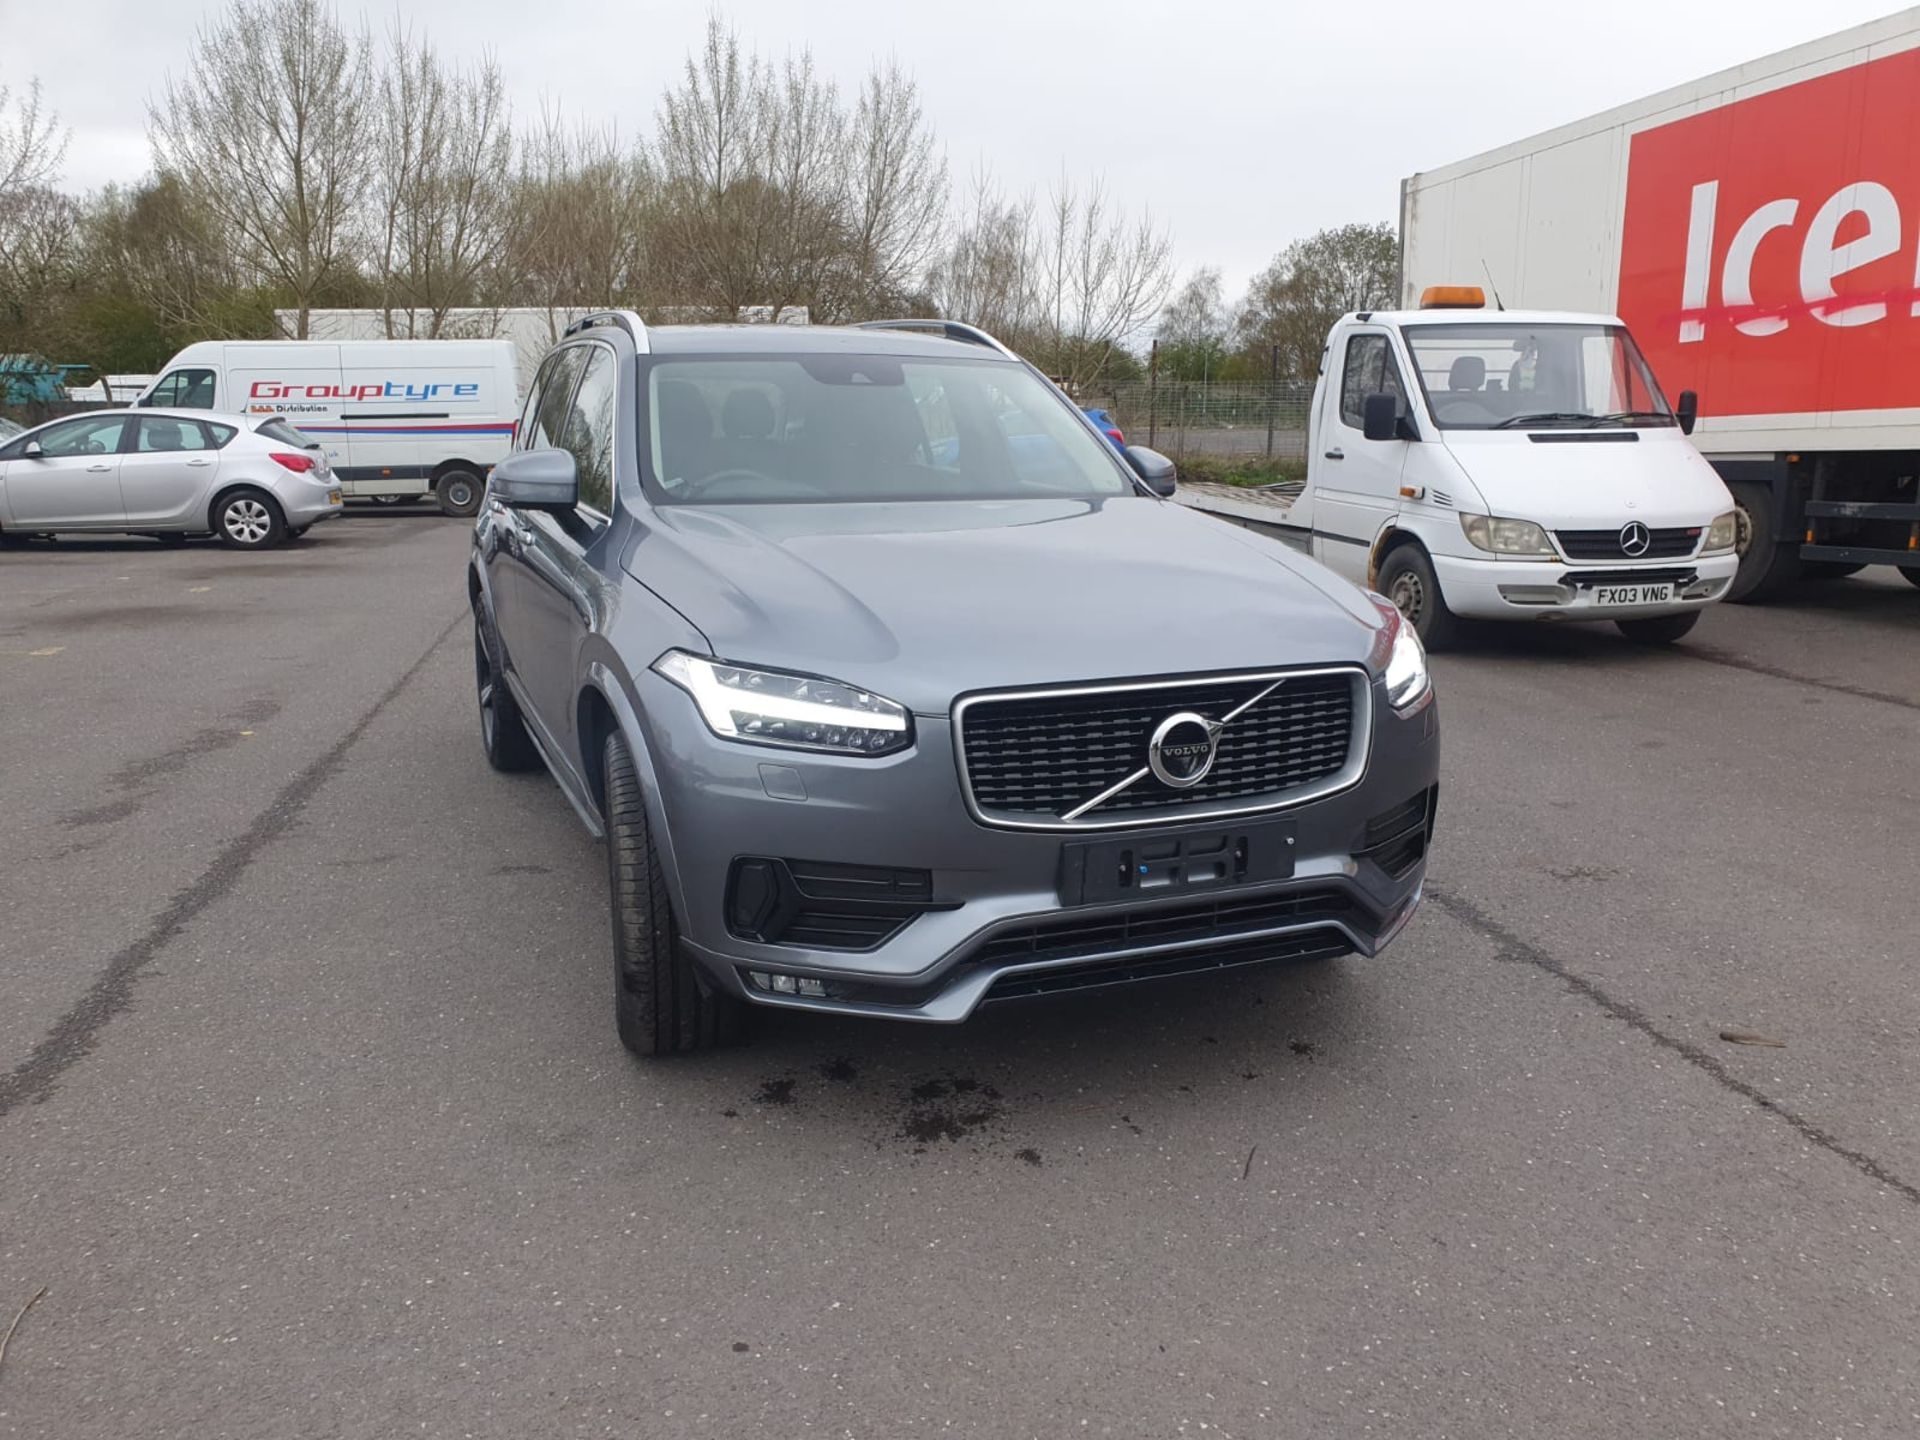 LOW MILEAGE, 2018/18 REG VOLVO XC90 MOMENTUM D5 P-PULSE 2.0 DIESEL 7 SEAT, SHOWING 0 FORMER KEEPERS - Image 2 of 18